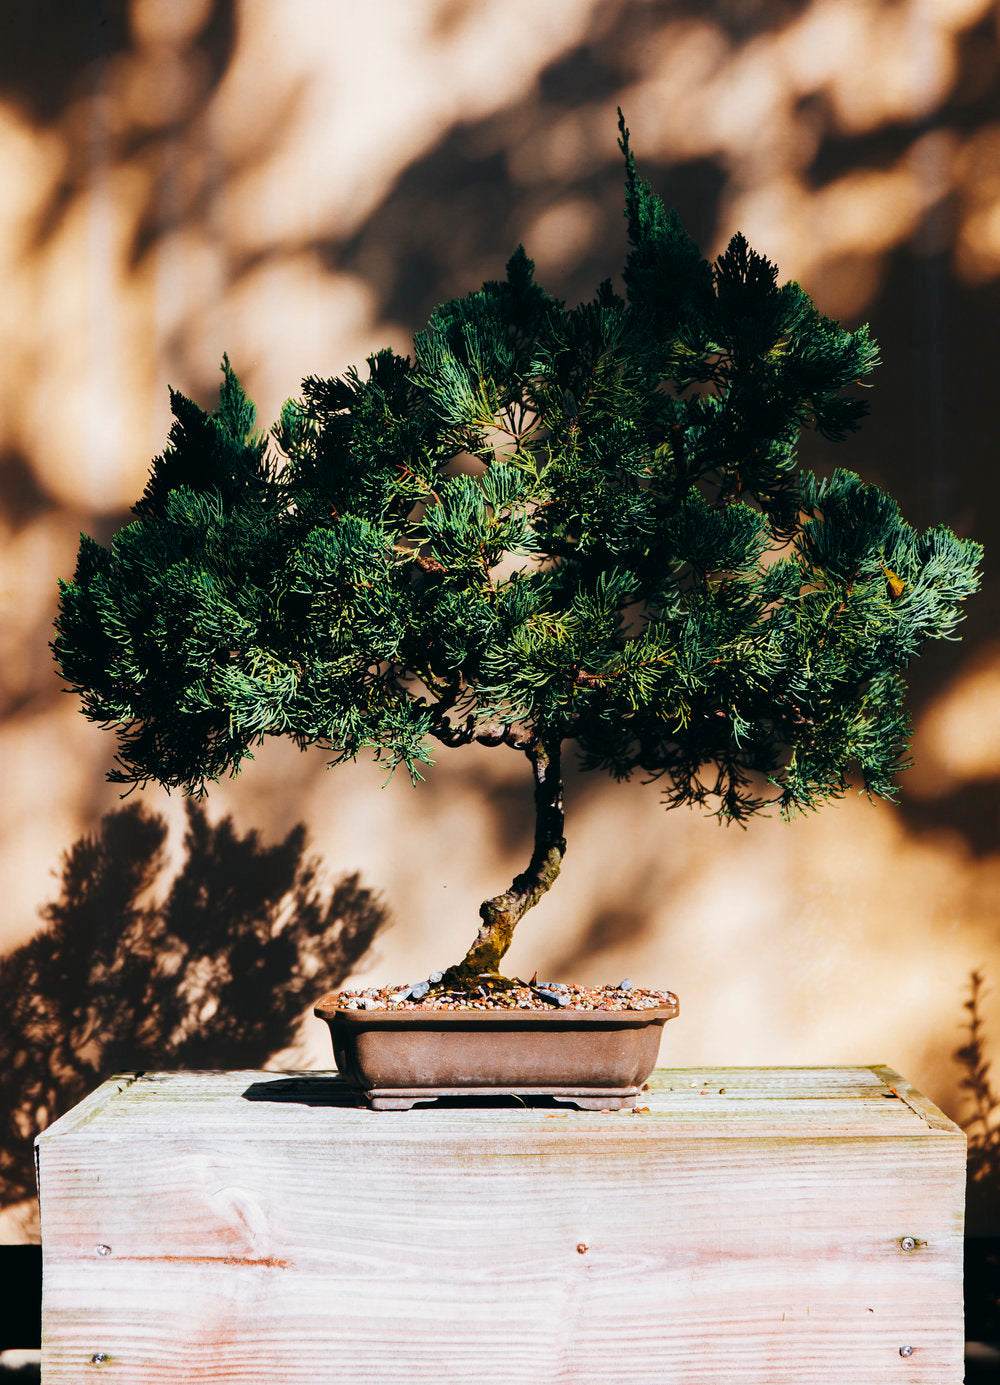  A meticulously groomed bonsai tree with dense, dark green foliage stands on a wooden platform, casting a complex shadow. The background is artistically blurred, highlighting the bonsai's intricate form against a warm, dappled light setting.